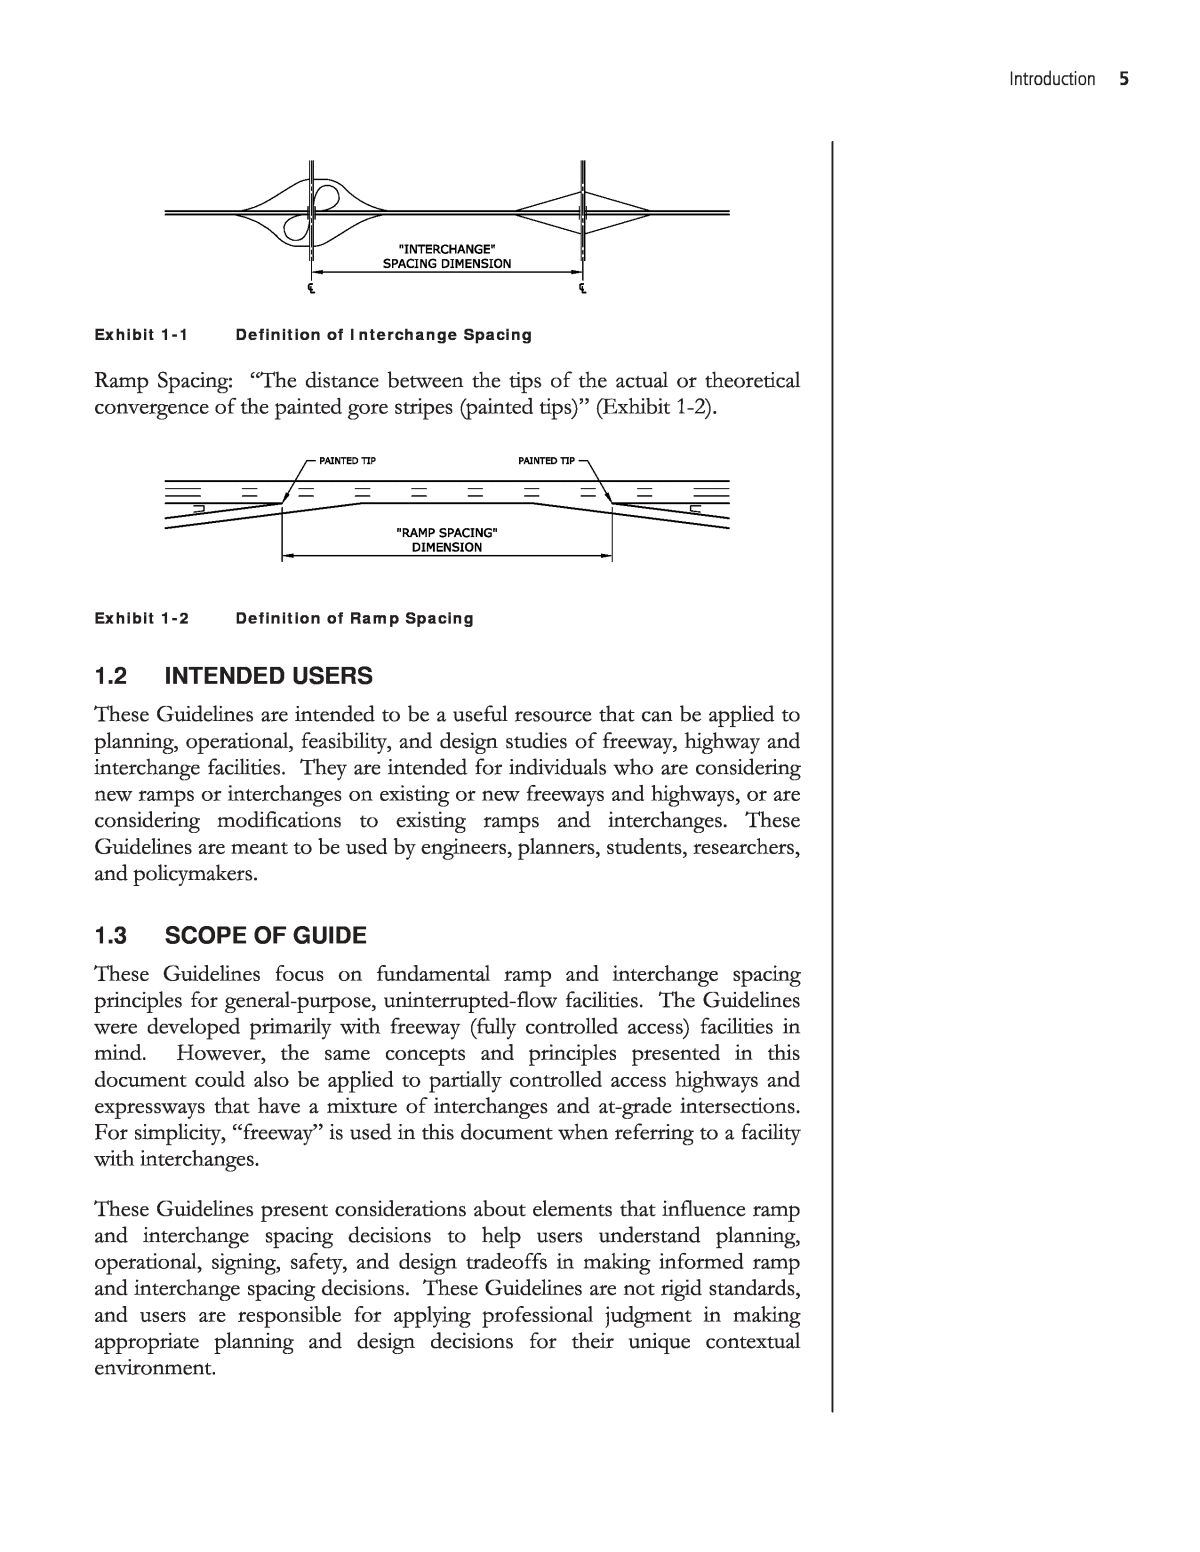 Chapter 1 - Introduction | Guidelines for Ramp and Interchange Spacing ...